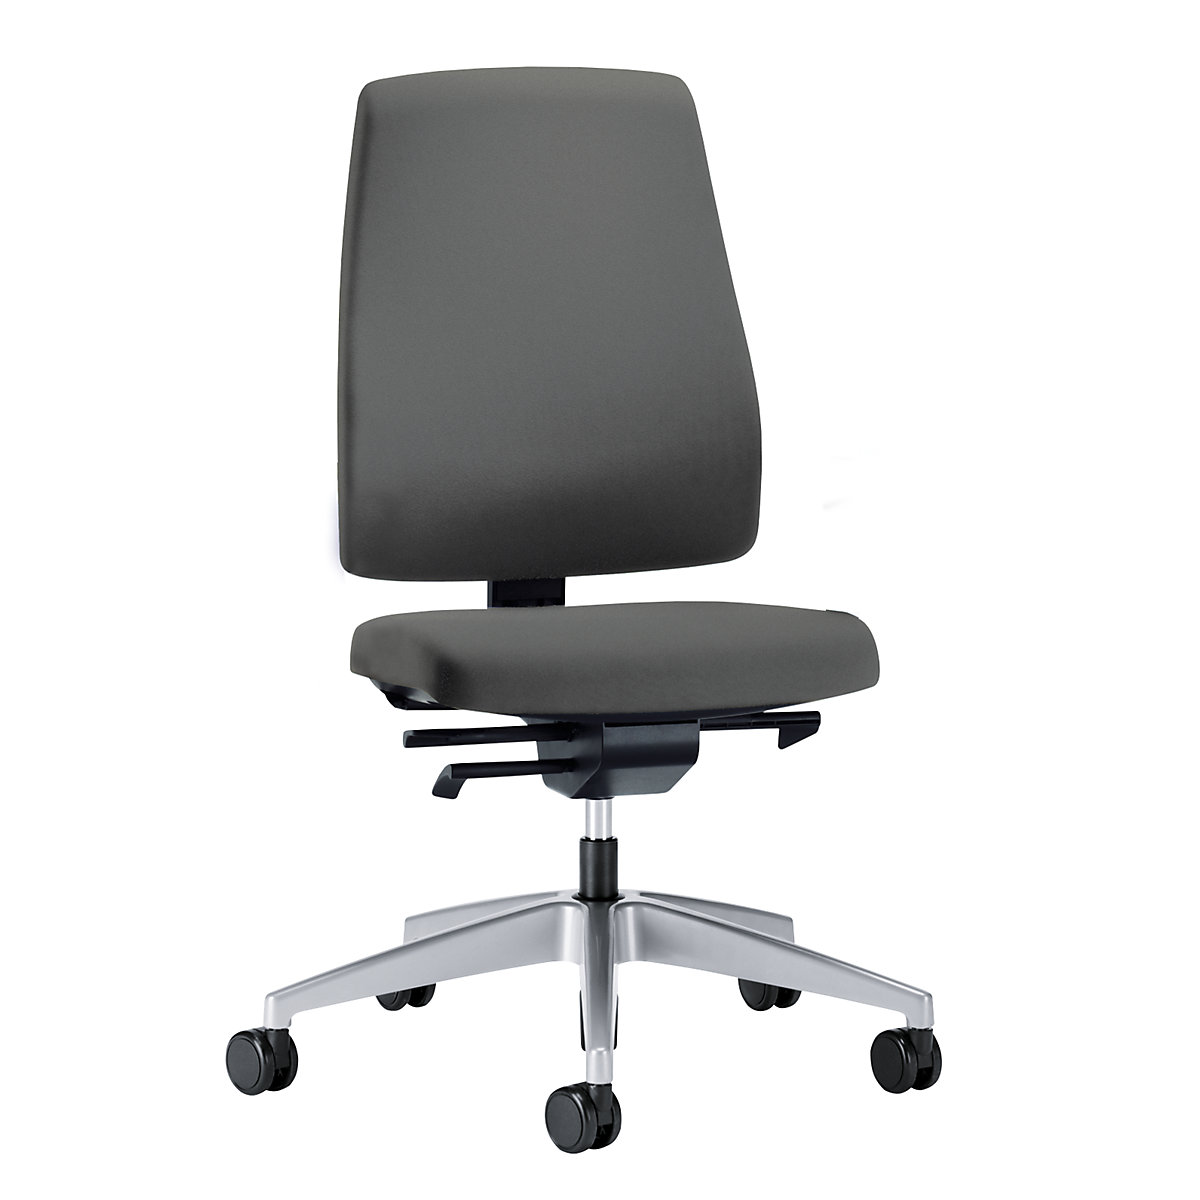 GOAL office swivel chair, back rest height 530 mm – interstuhl, brilliant silver frame, with soft castors, iron grey, seat depth 410 mm-3